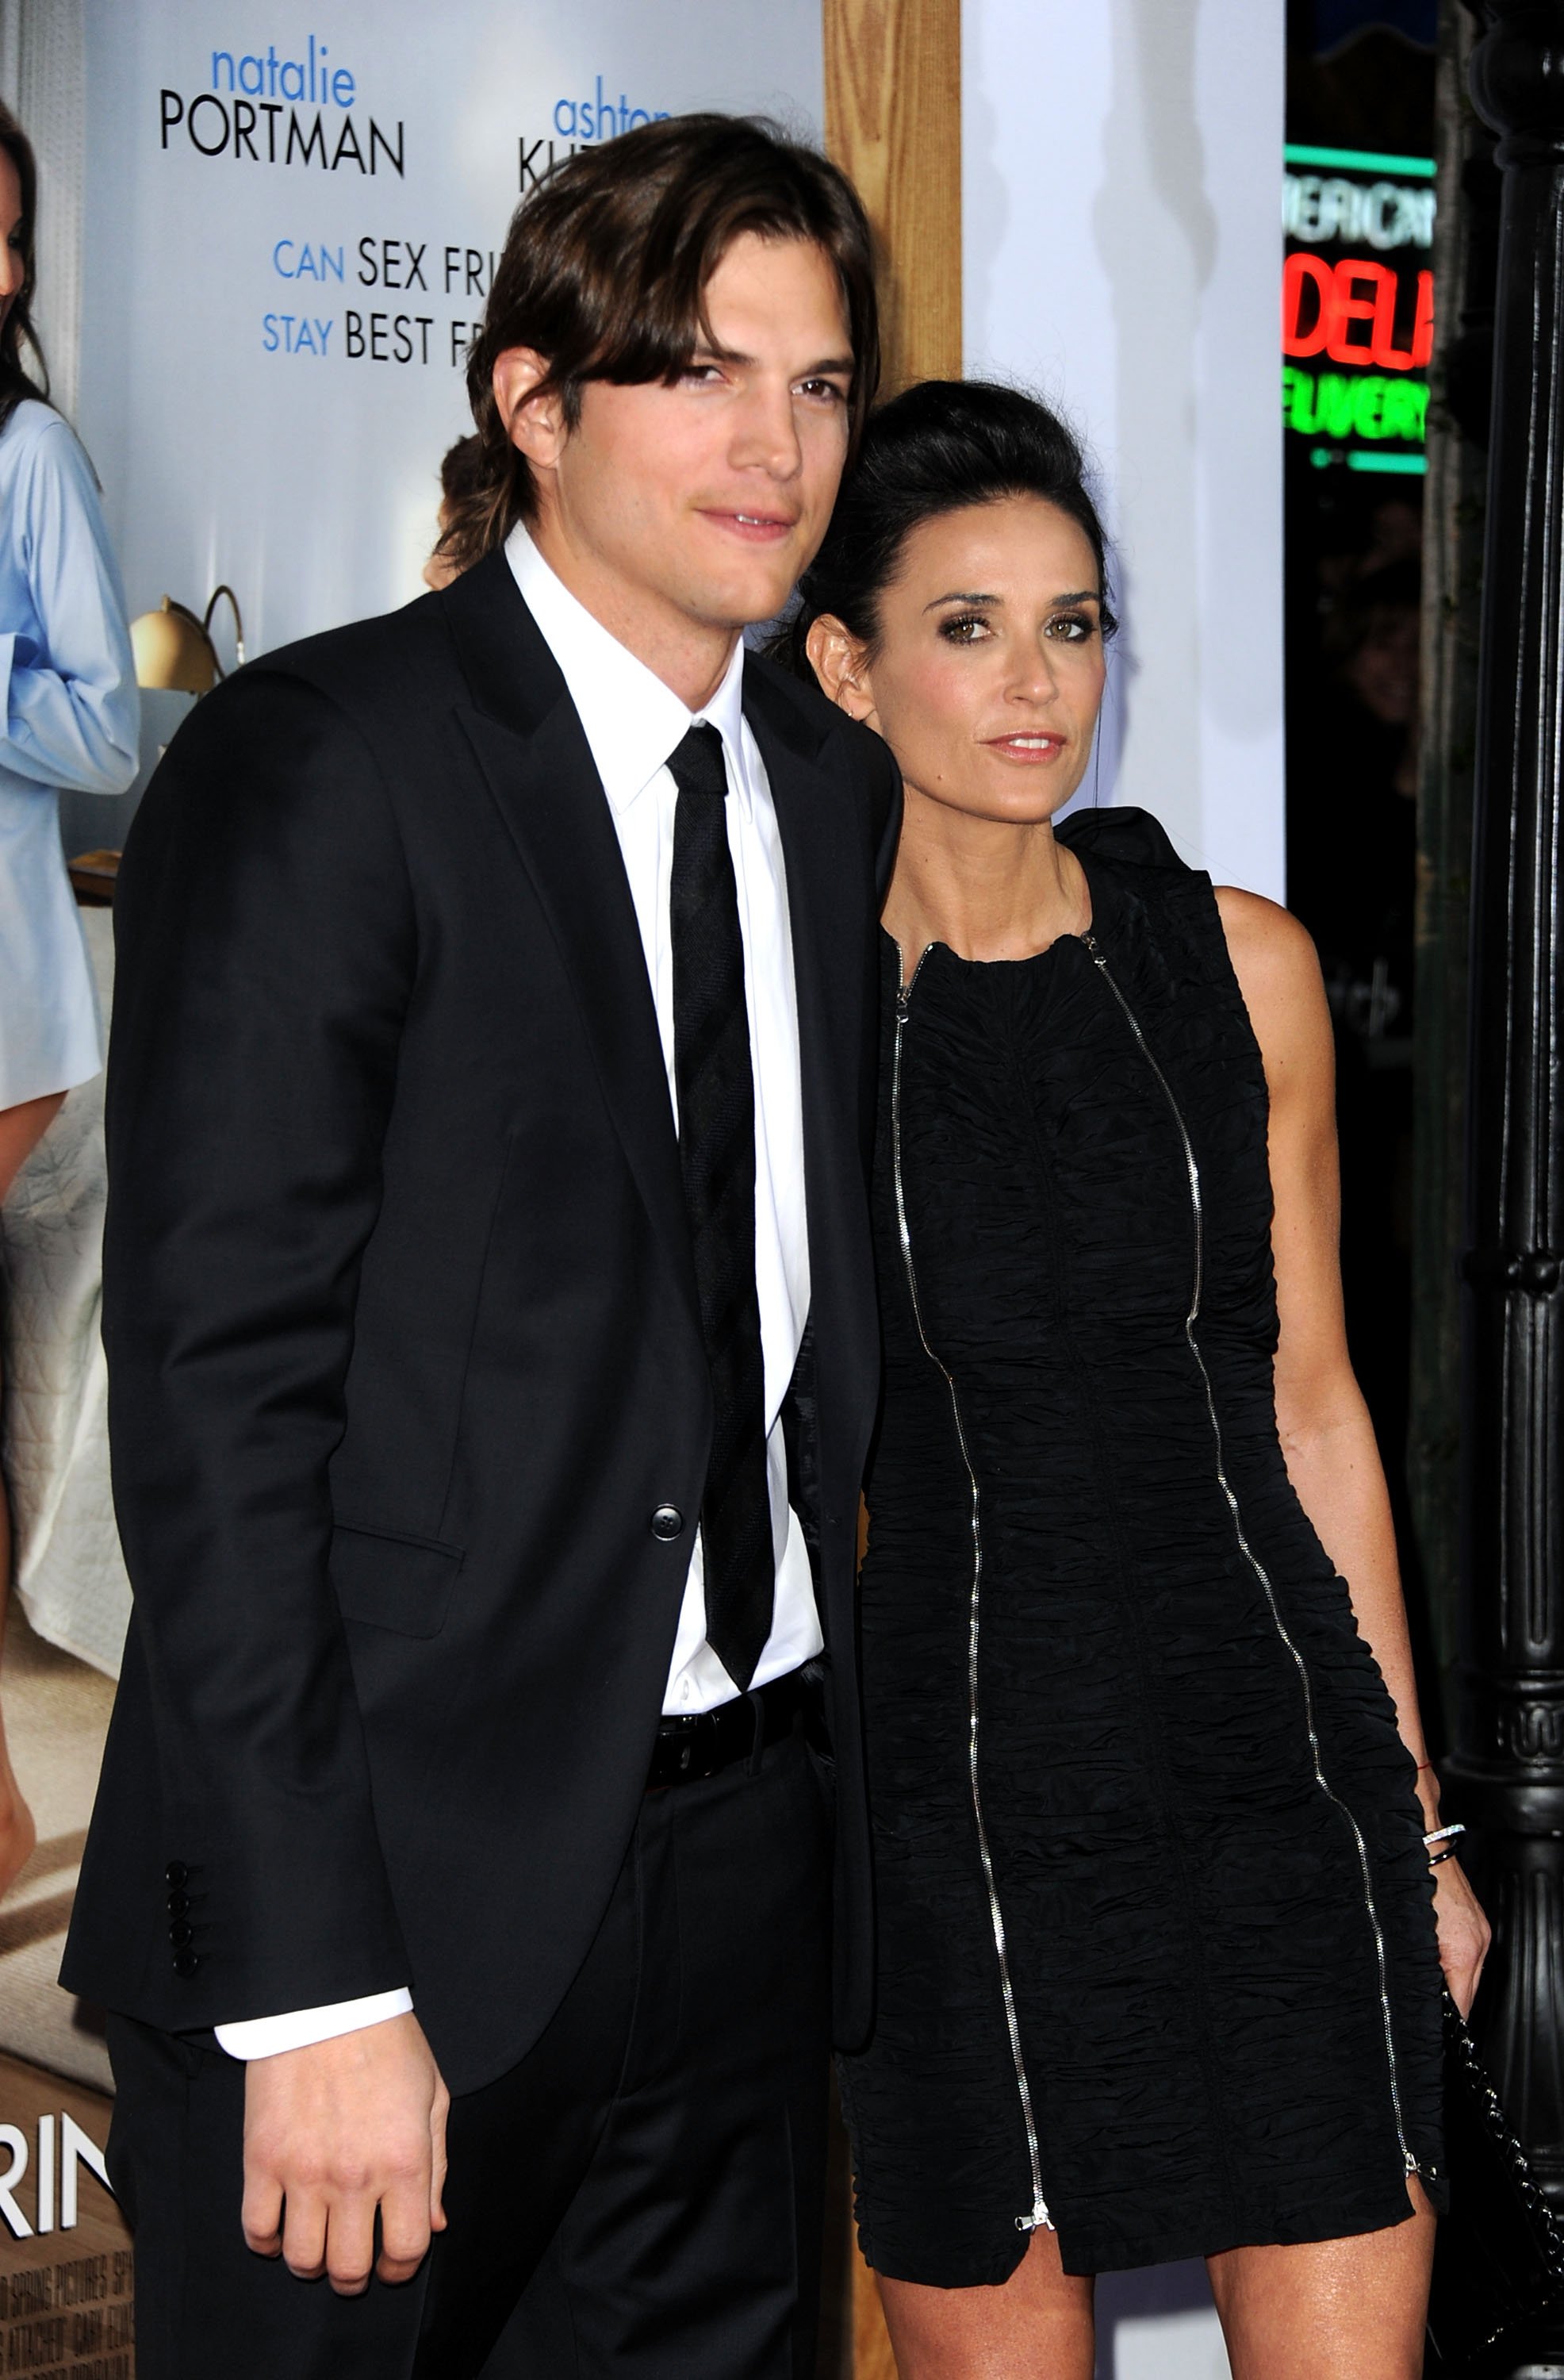 Ashton Kutcher and Demi Moore at Paramount Pictures' "No Strings Attached" premiere | Source: Getty Images